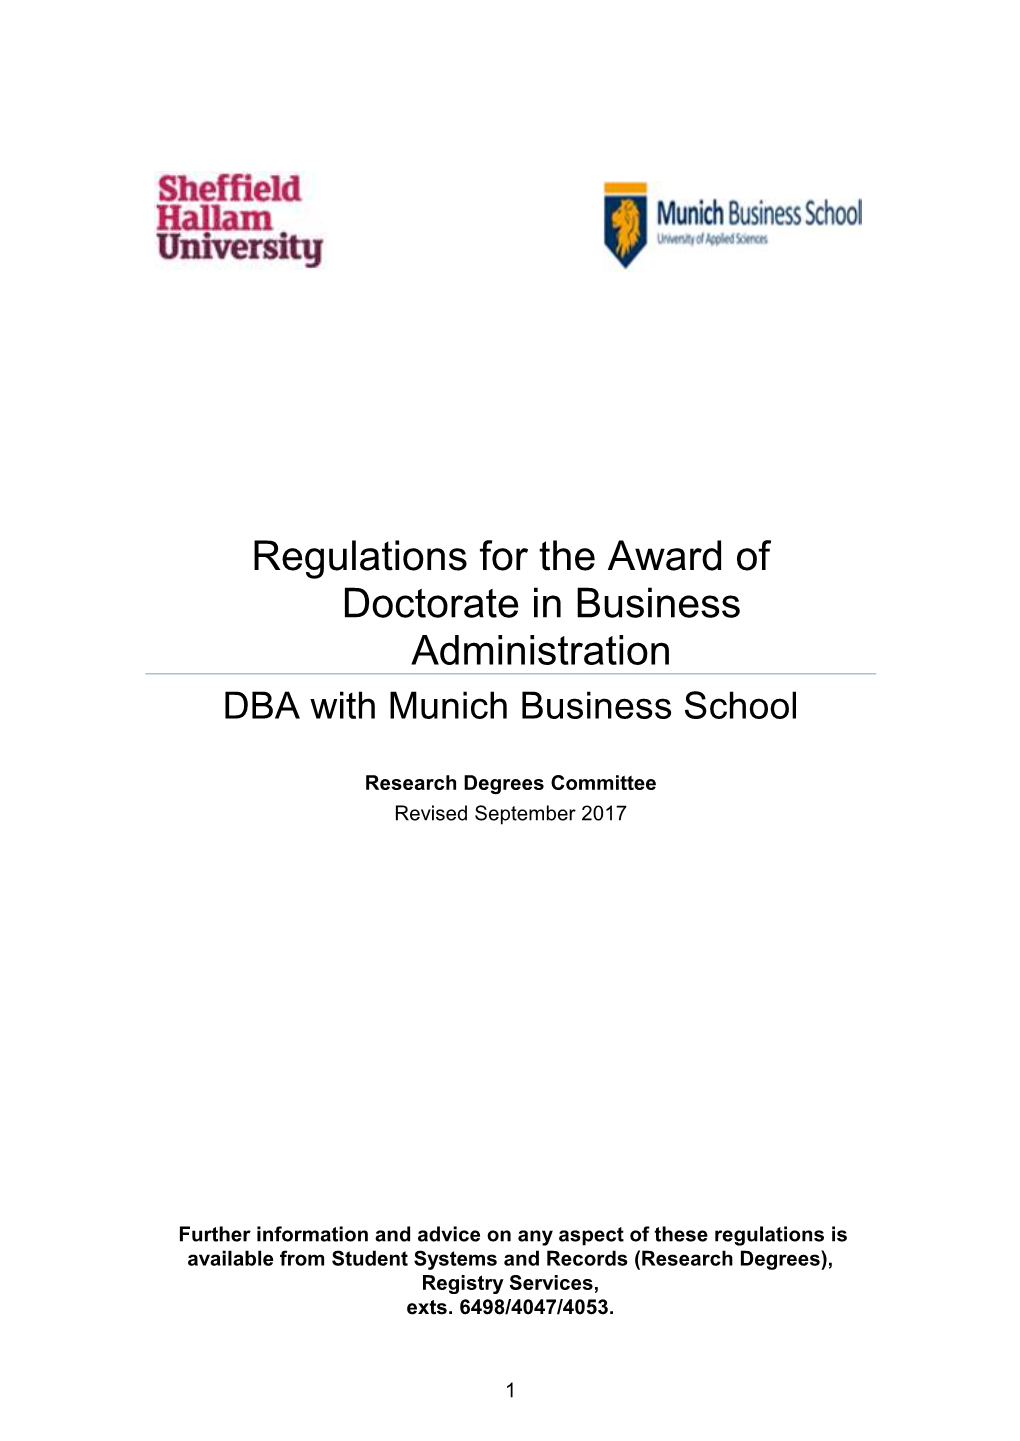 Regulations for DBA with Munich Business School 2014-15